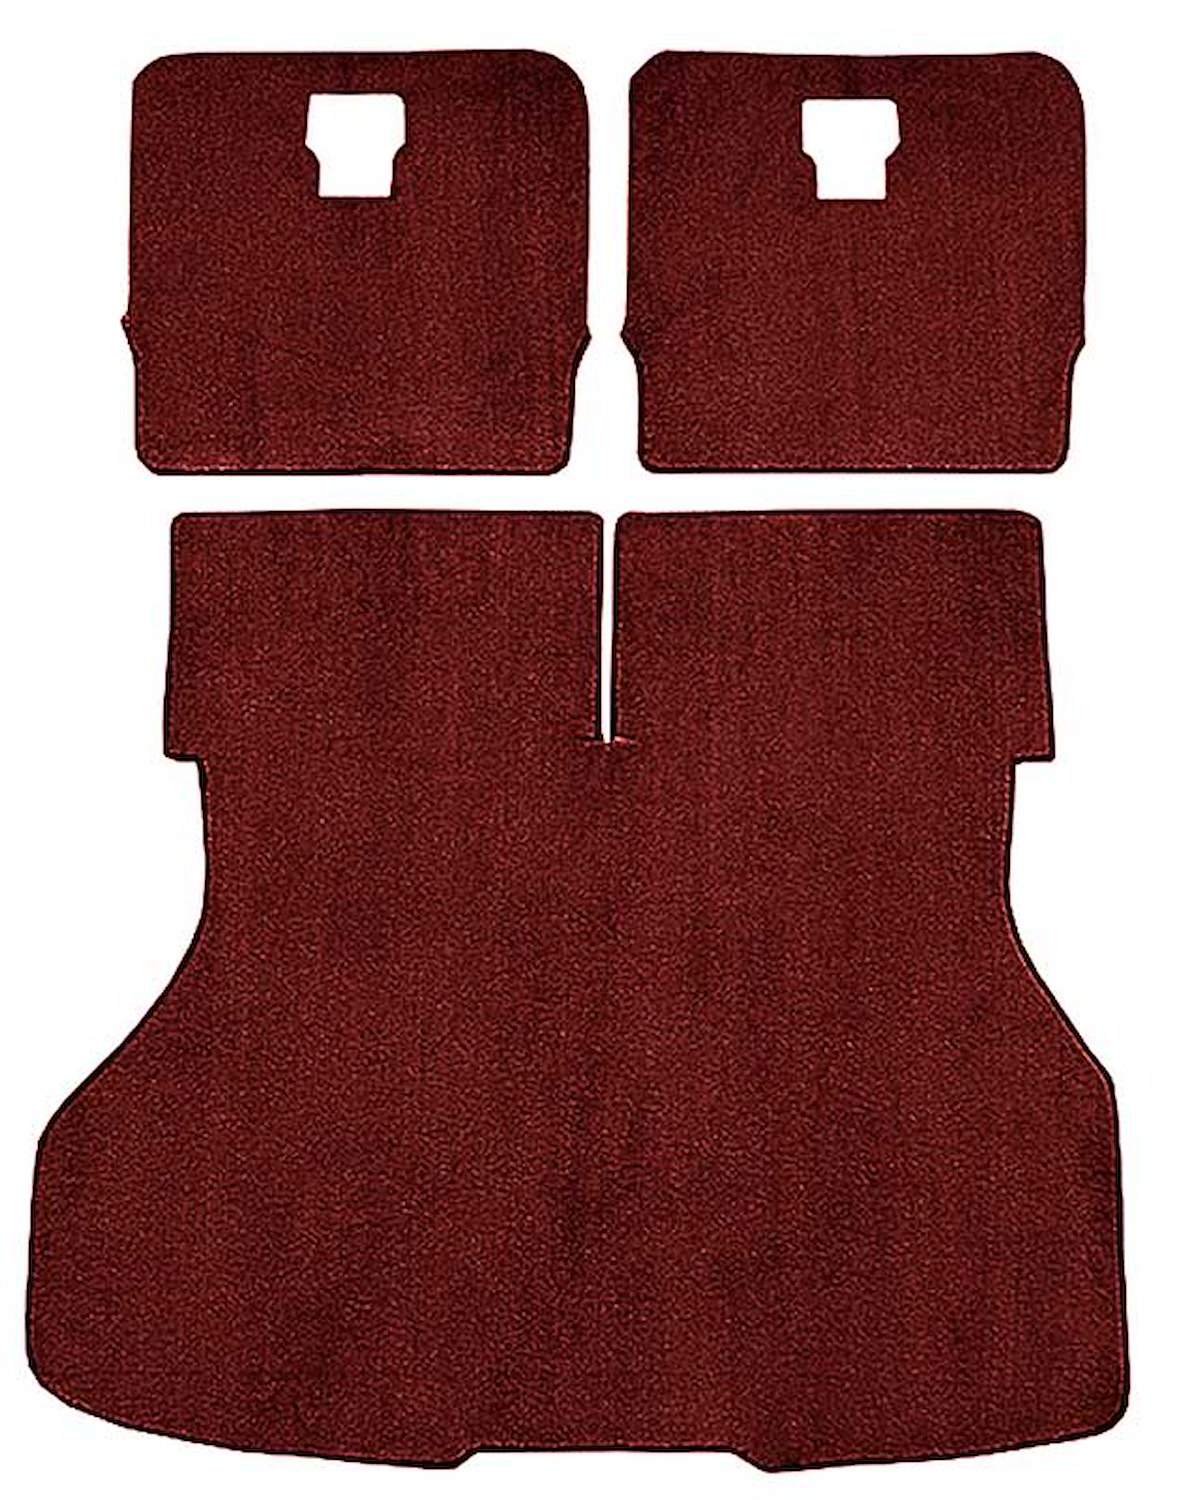 A4026B21 Rear Cargo Area Cut Pile Carpet Set 1987-93 Mustang Hatchback With Mass Backing; Oxblood